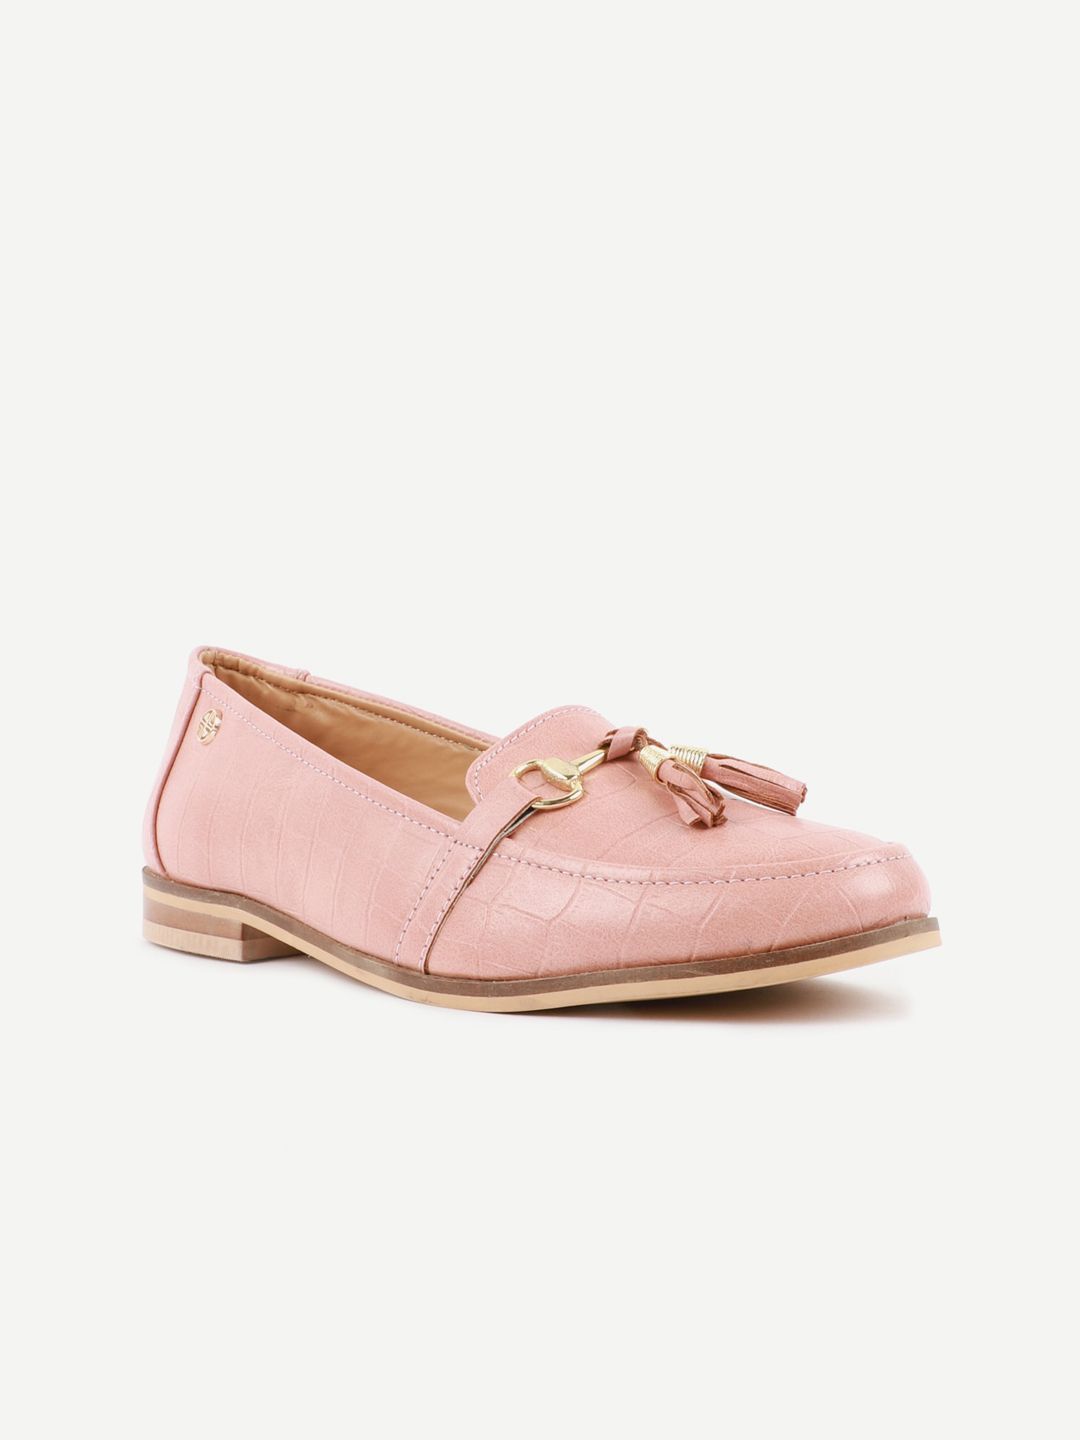 Carlton London Women Pink Textured Loafers Price in India